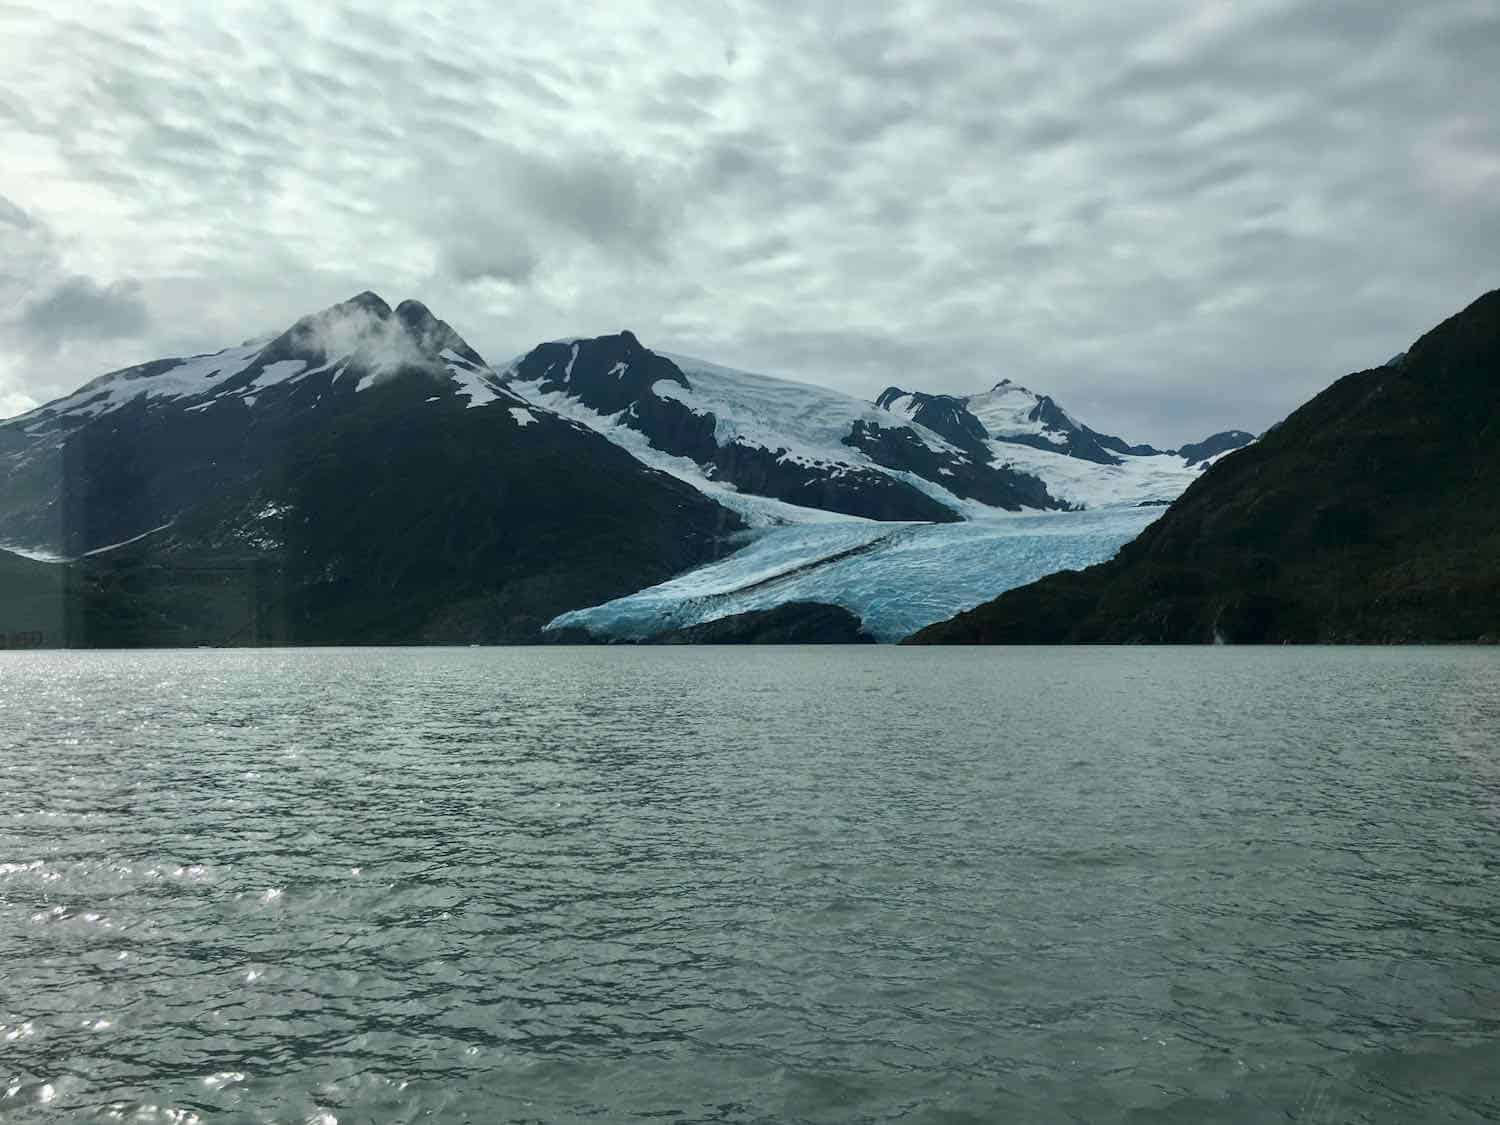 Glacier sloping down to the ocean